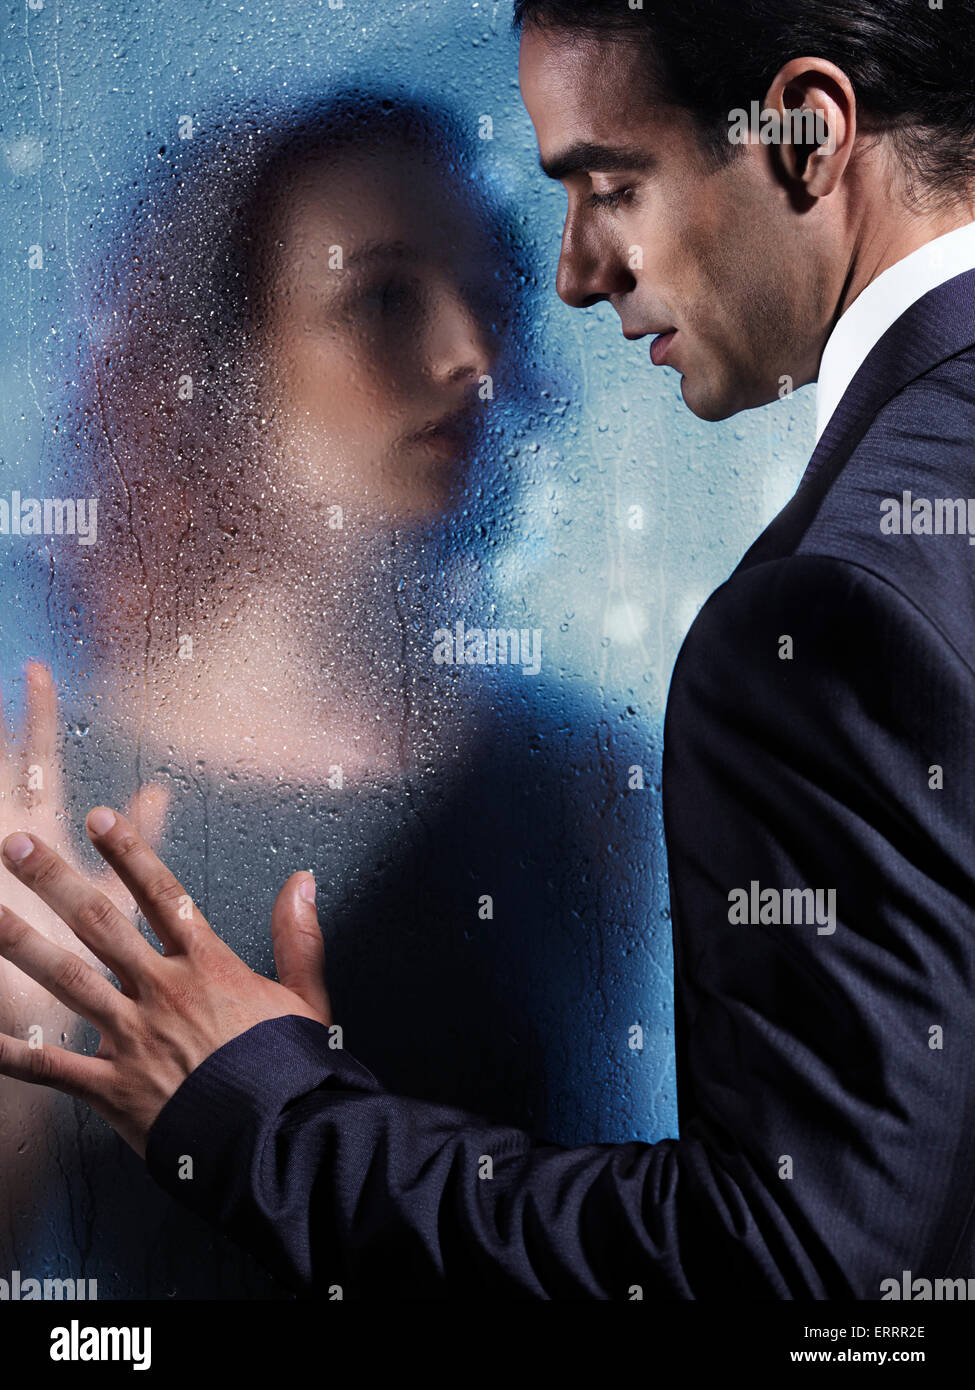 Emotional portrait of a young man and a woman separated by a wet glass pane. Couple relationship concept. Stock Photo